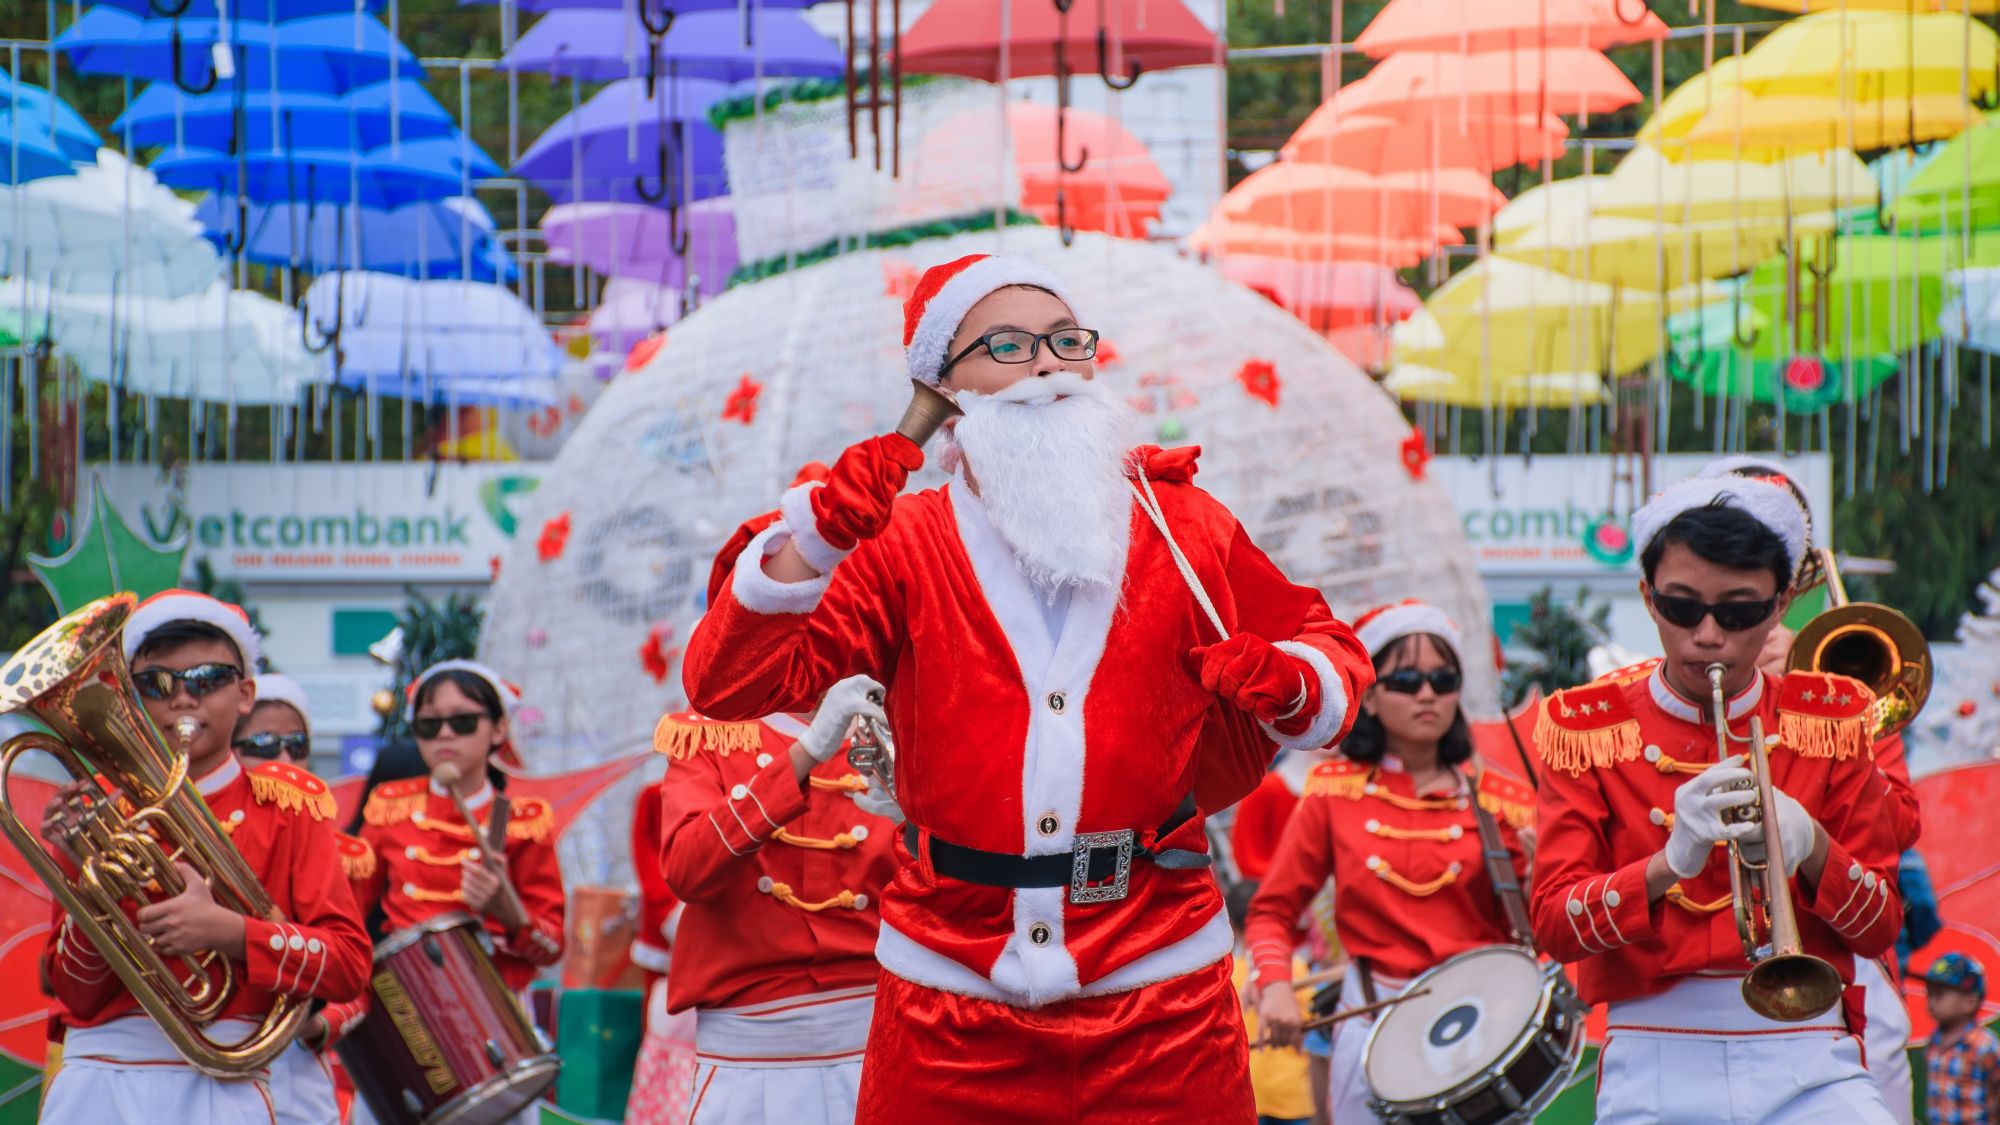 Dress Up In Santa Outfits And Walk Around The Streets During Christmas in Vietnam